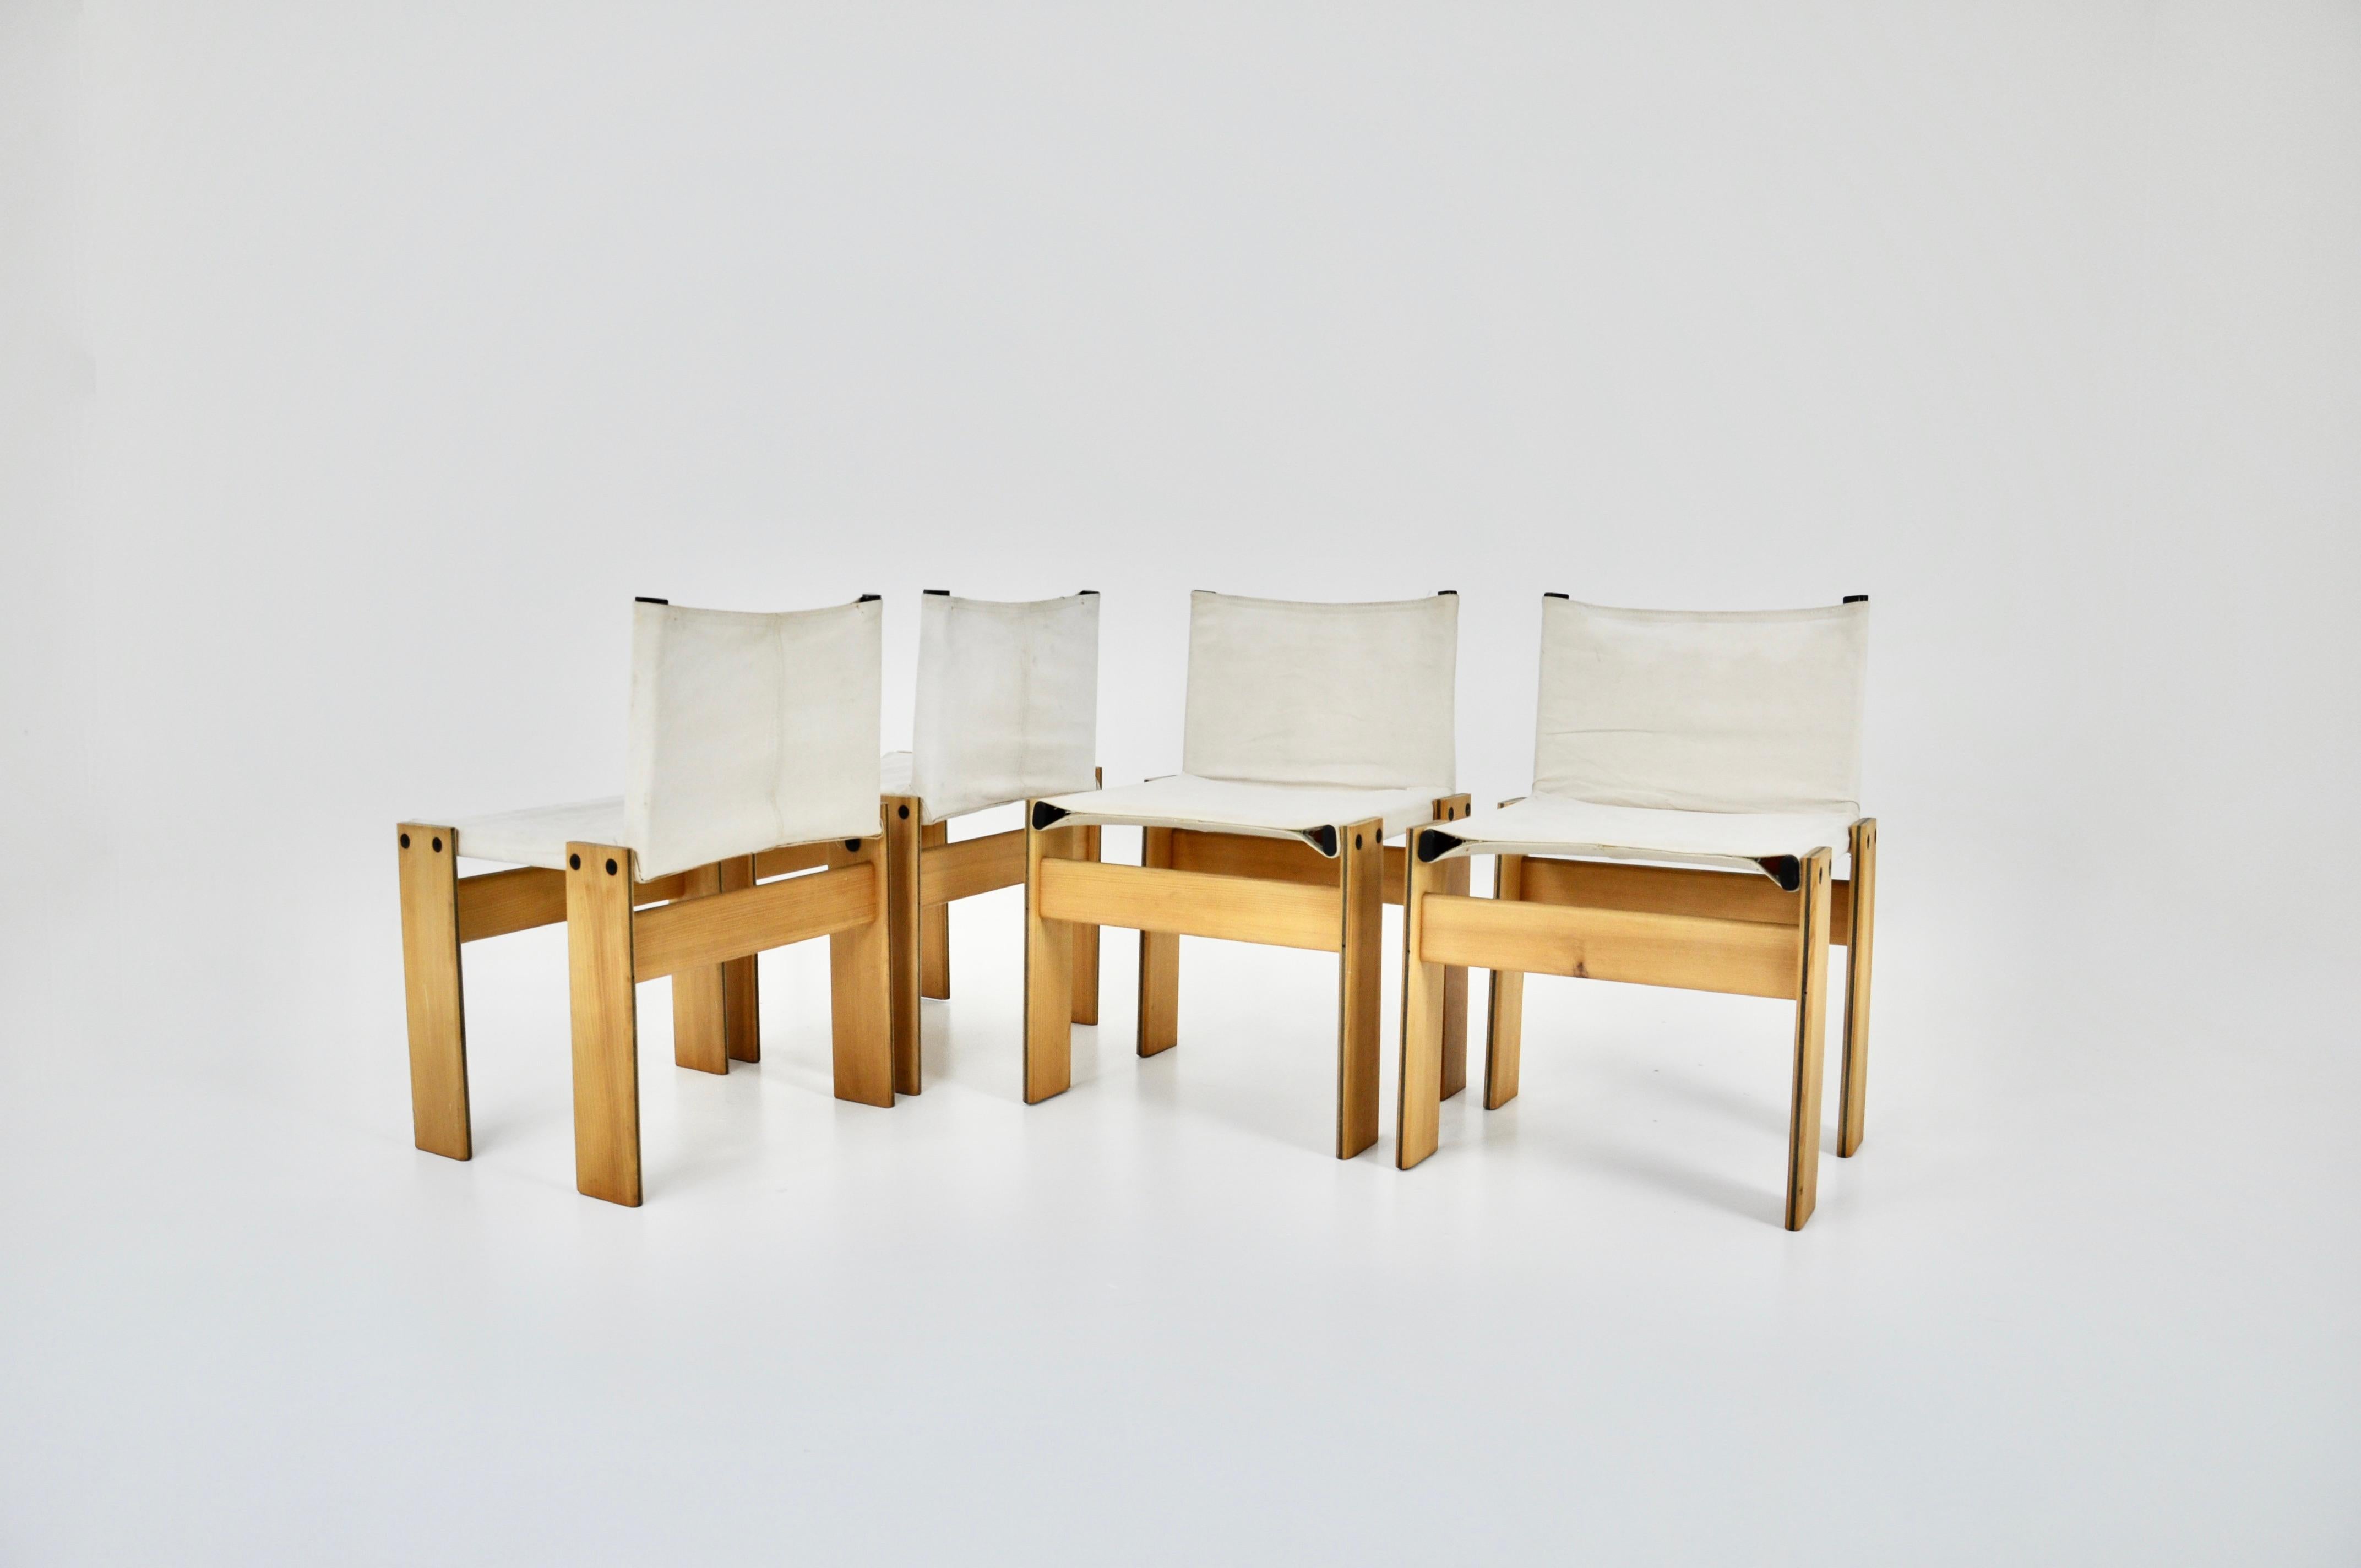 Set of 4 chairs in fabric and wood. Measures: Seat height: 44cm.
Wear due to time and age of the chairs.